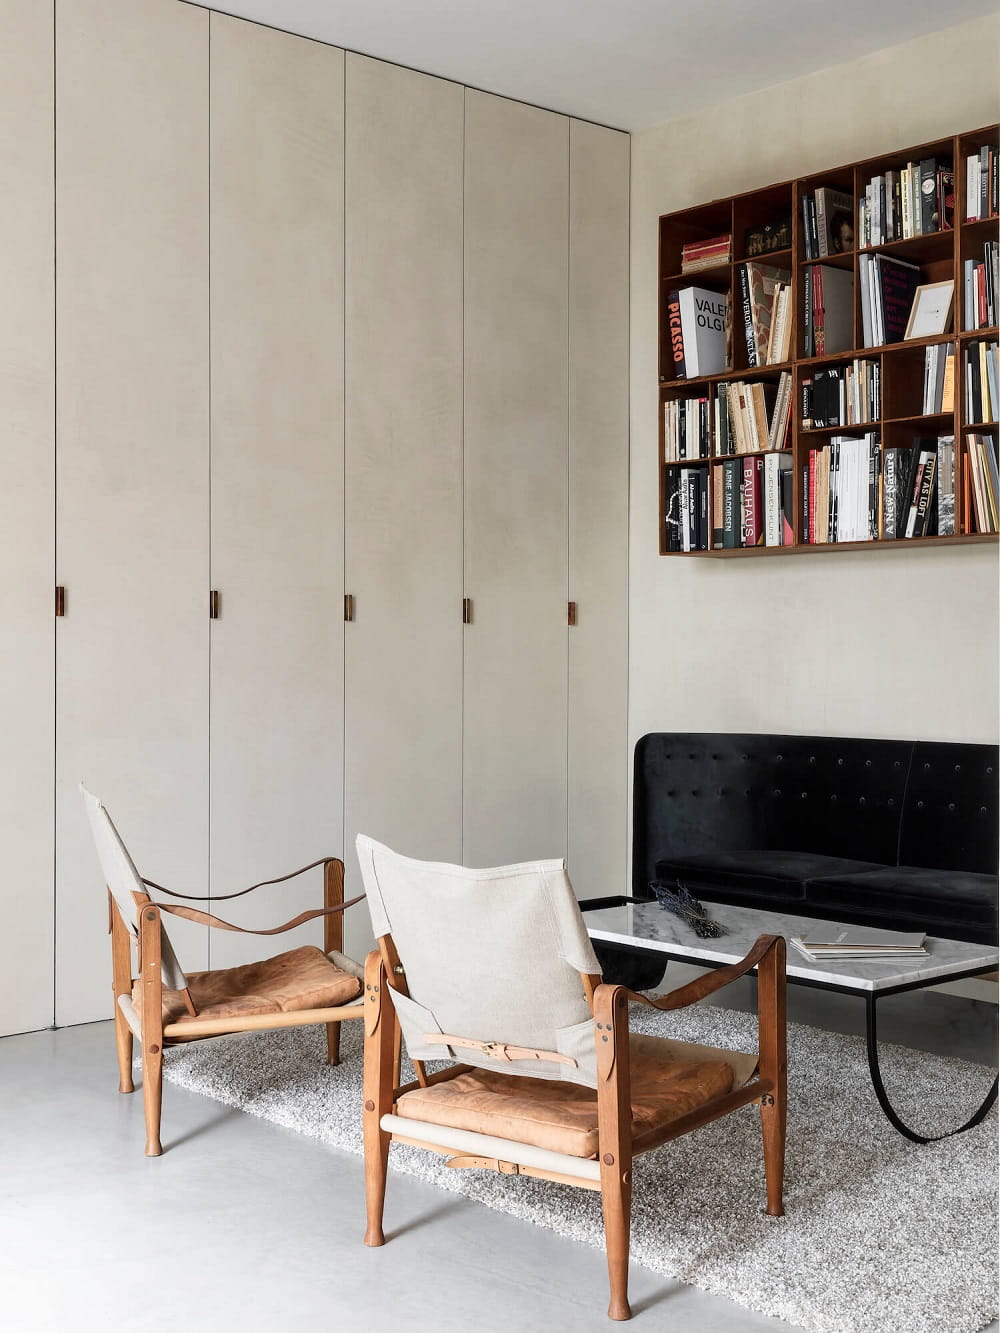 Safari Chairs by Kaare Klint for Carl Hansen & Son; Piero Coffee Table by Joa Herrenknecht from Bolia; Mayor Sofa by Arne Jacobsen & Flemming Lassen for &Tradition